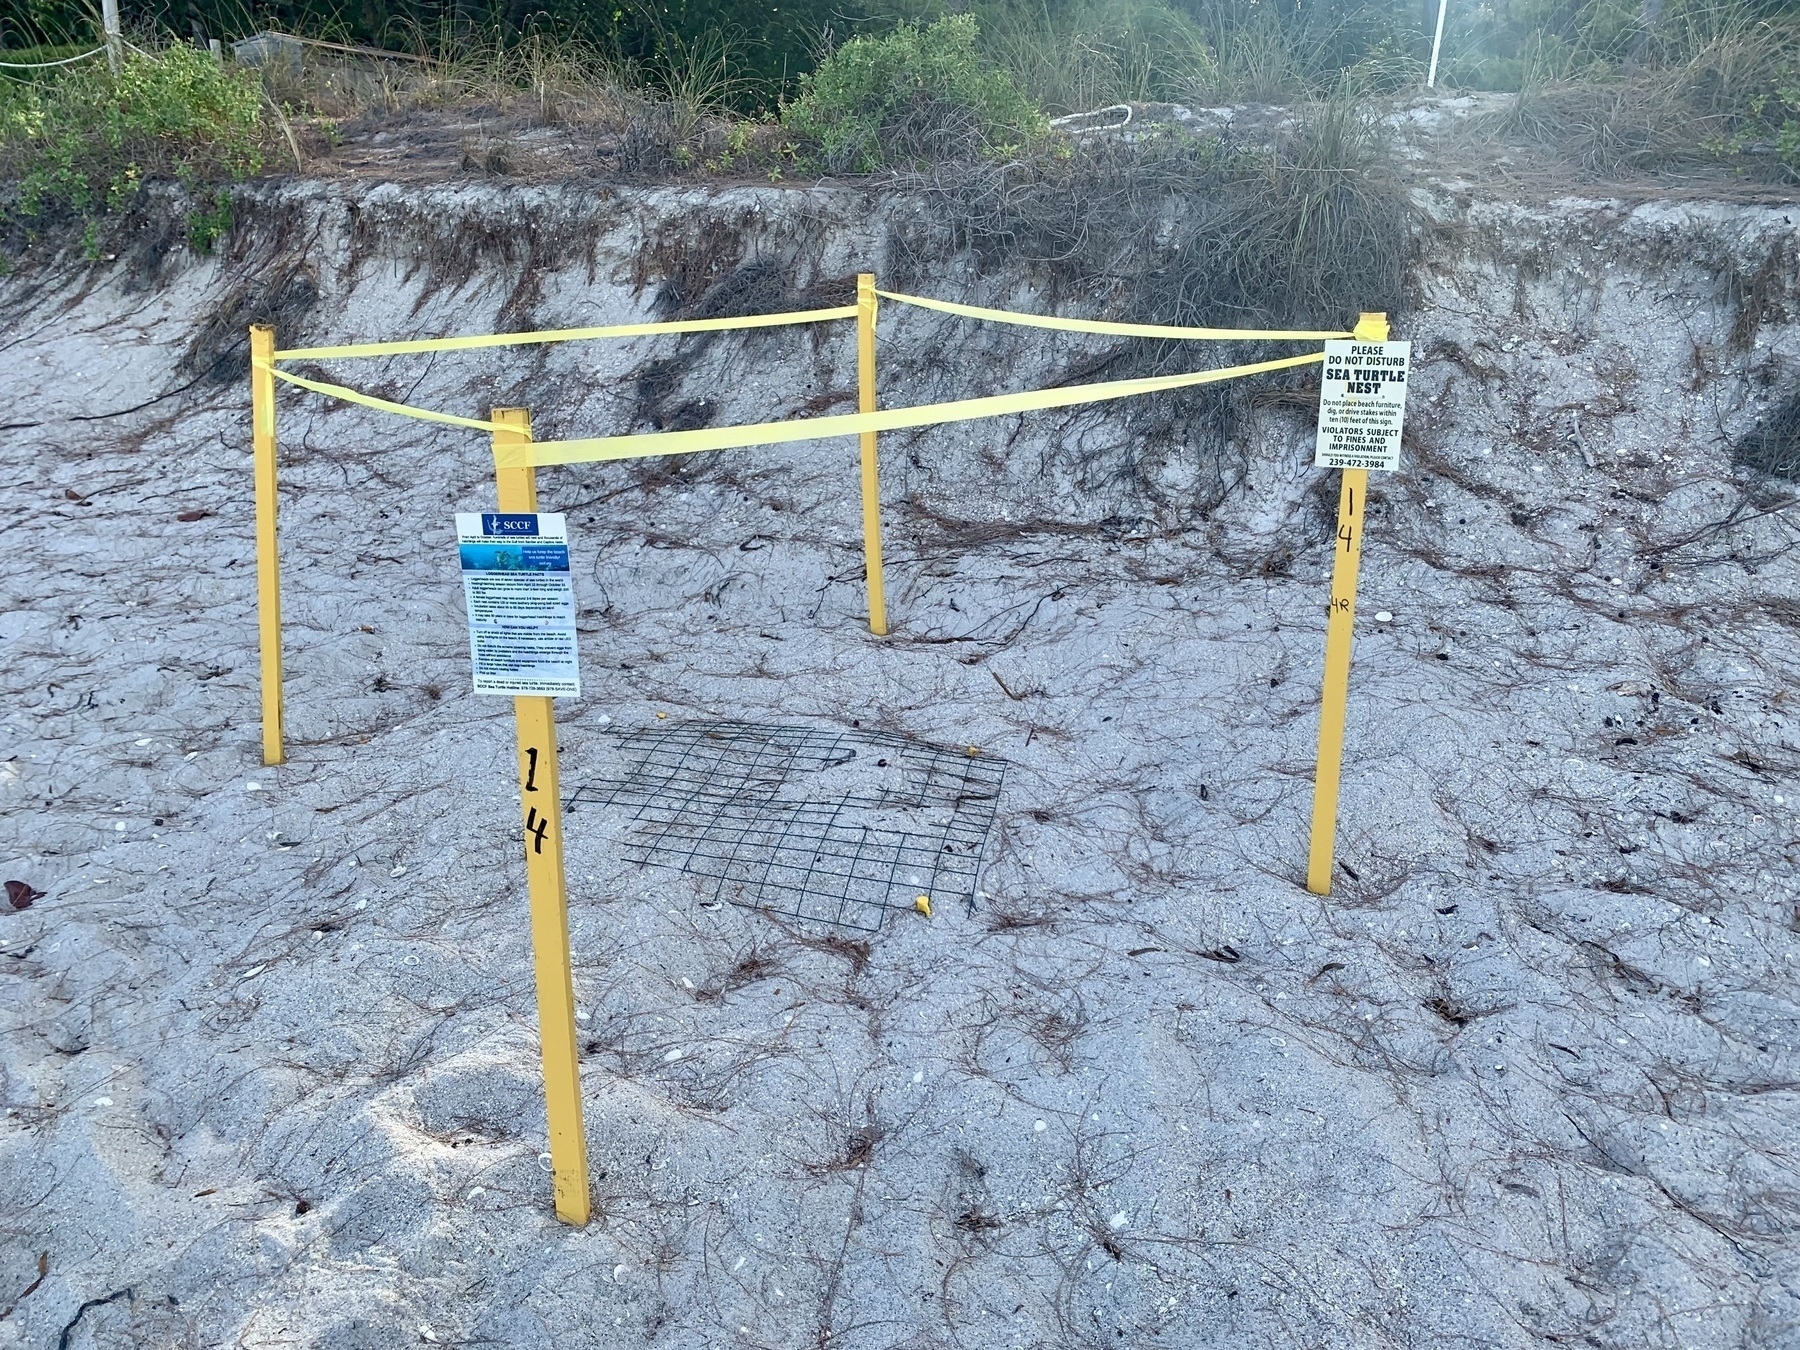 Four yellow posts cordoning off a square section of the beach. “Sea turtle nest” is written on one of the posts, with smaller print underneath.